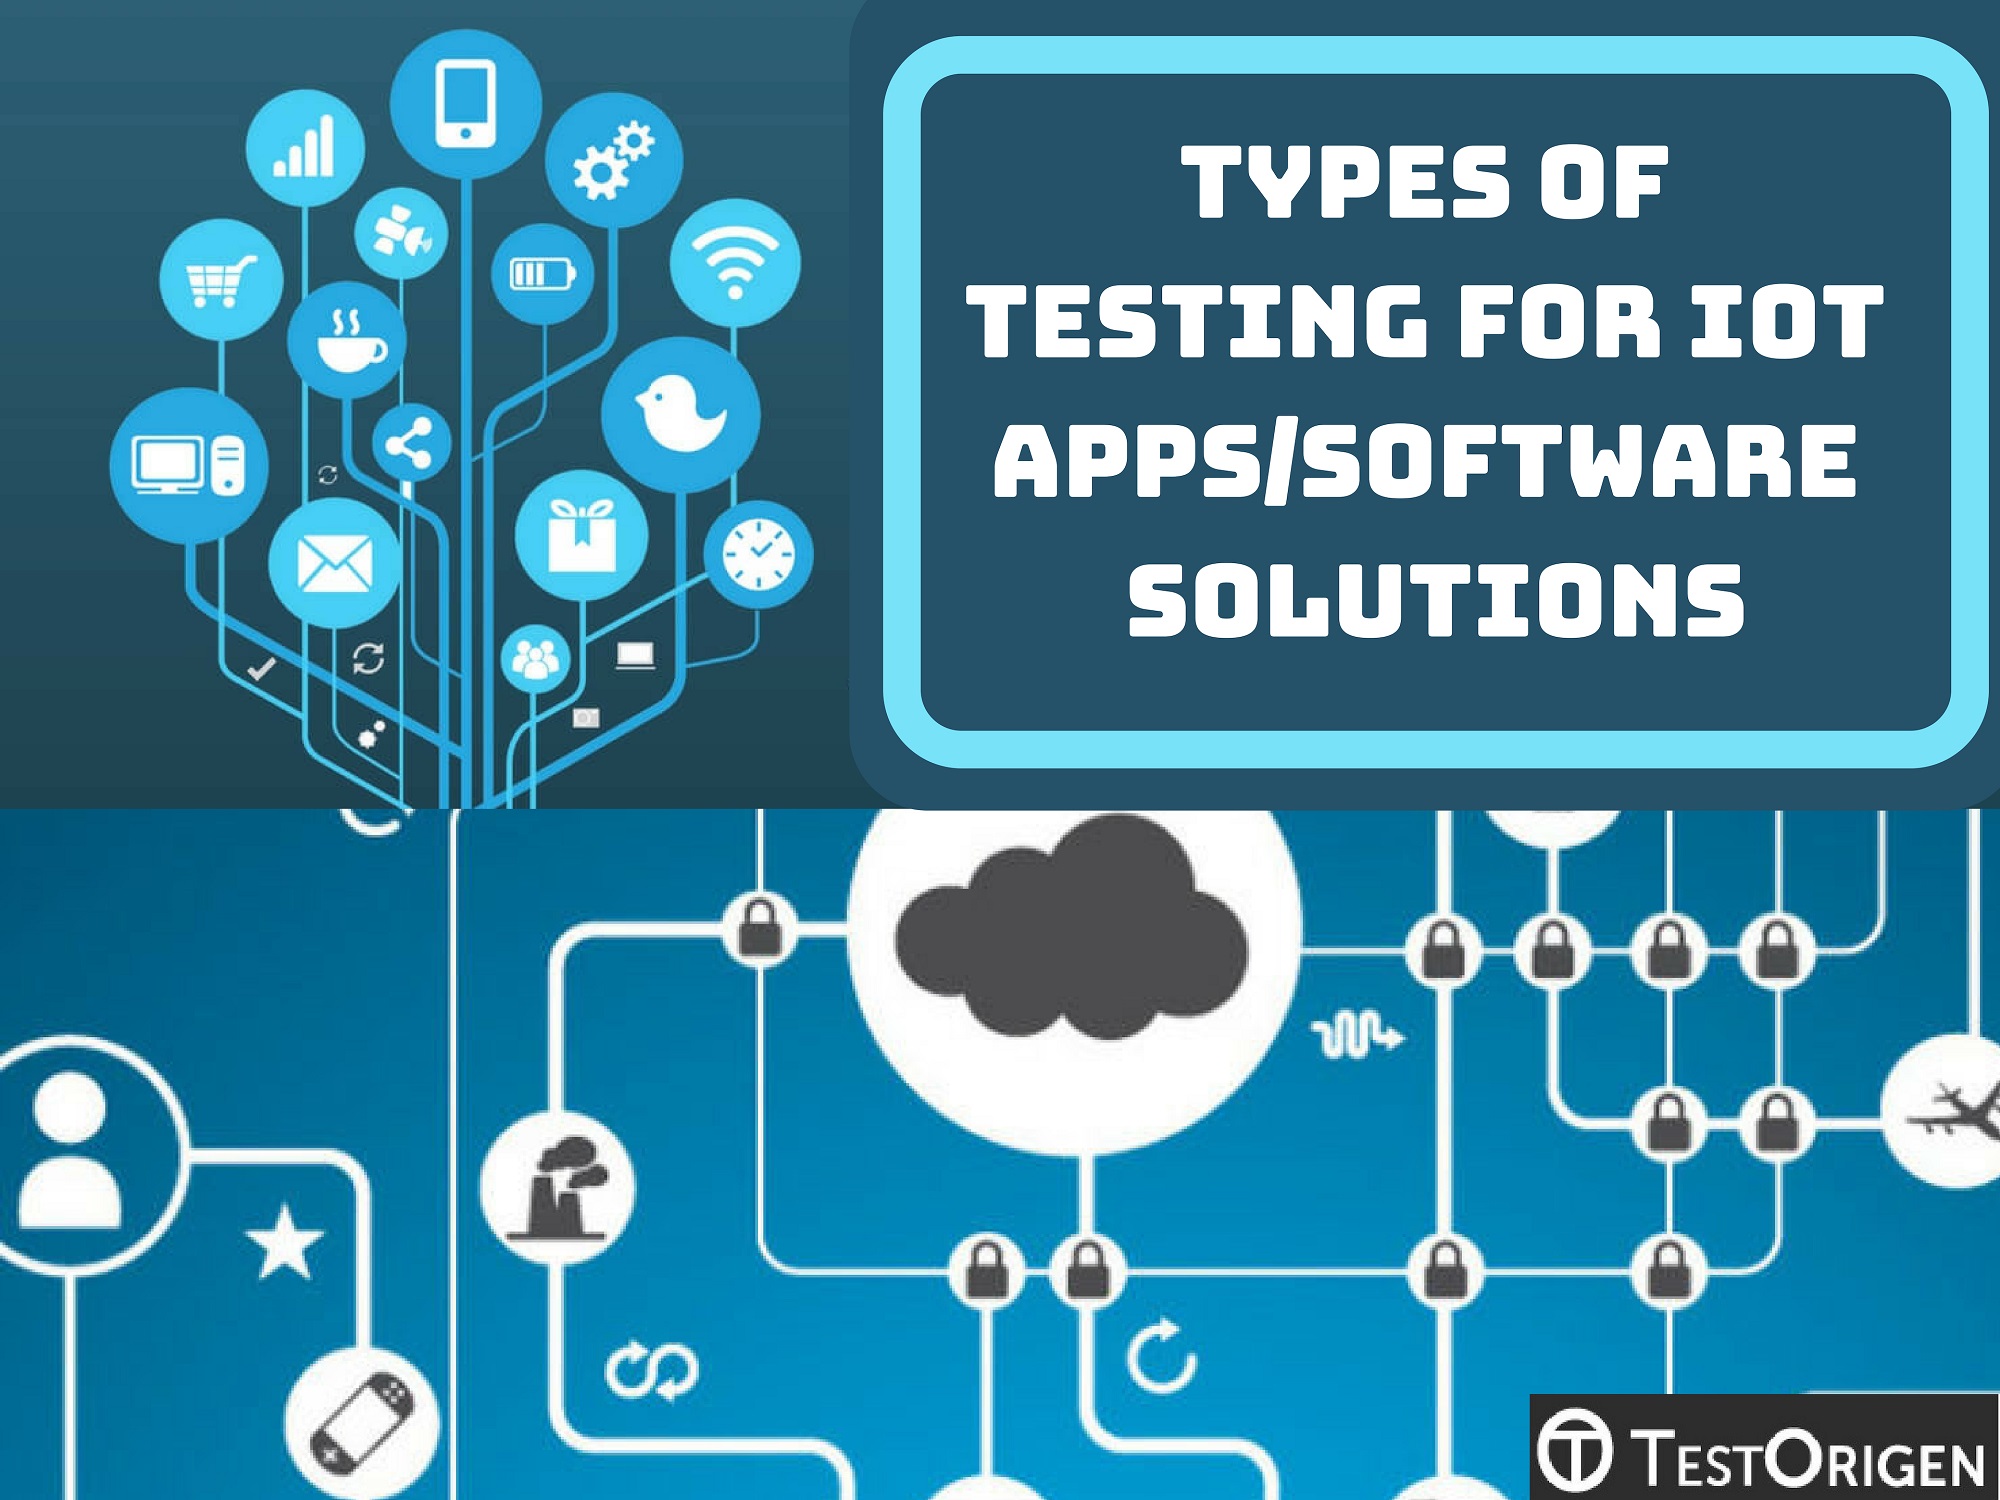 Types of Testing for IoT Apps/Software Solutions